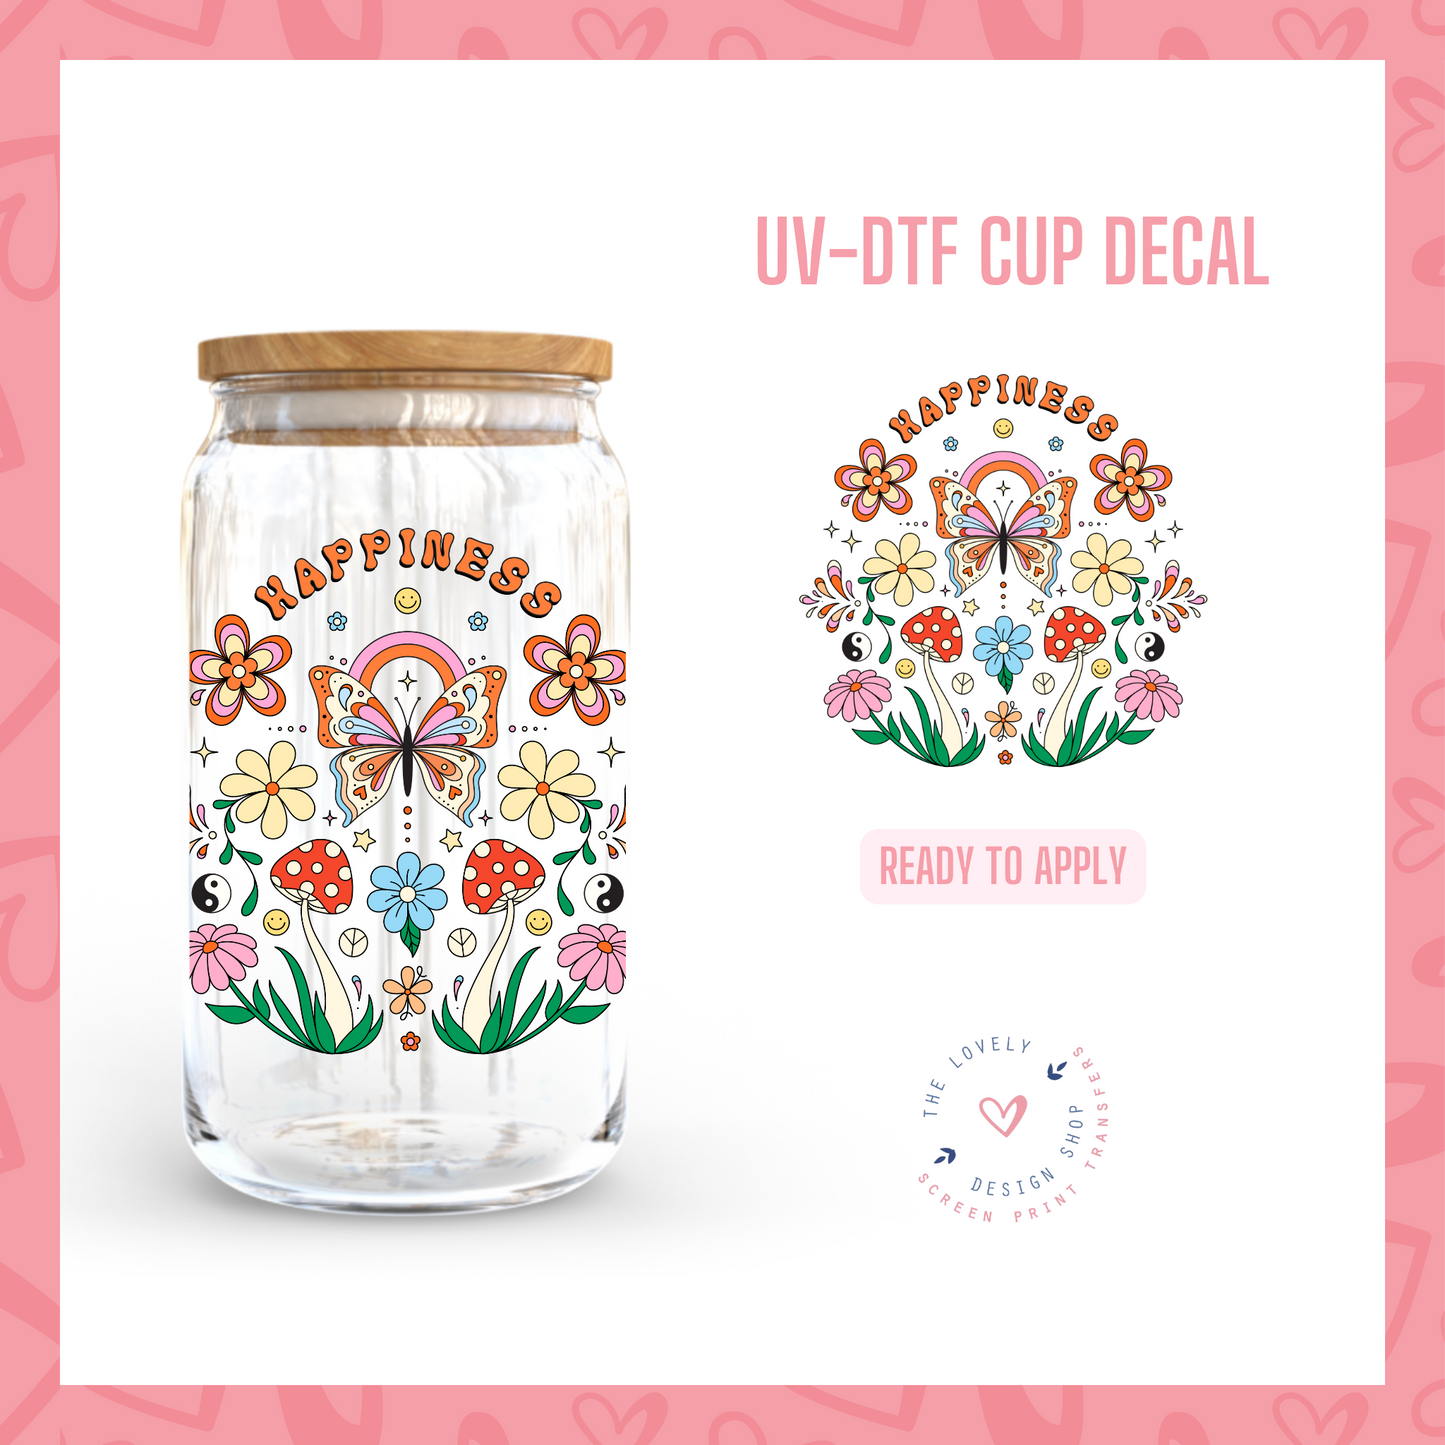 Happiness - UV DTF Cup Decal (Ready to Ship) Feb 27